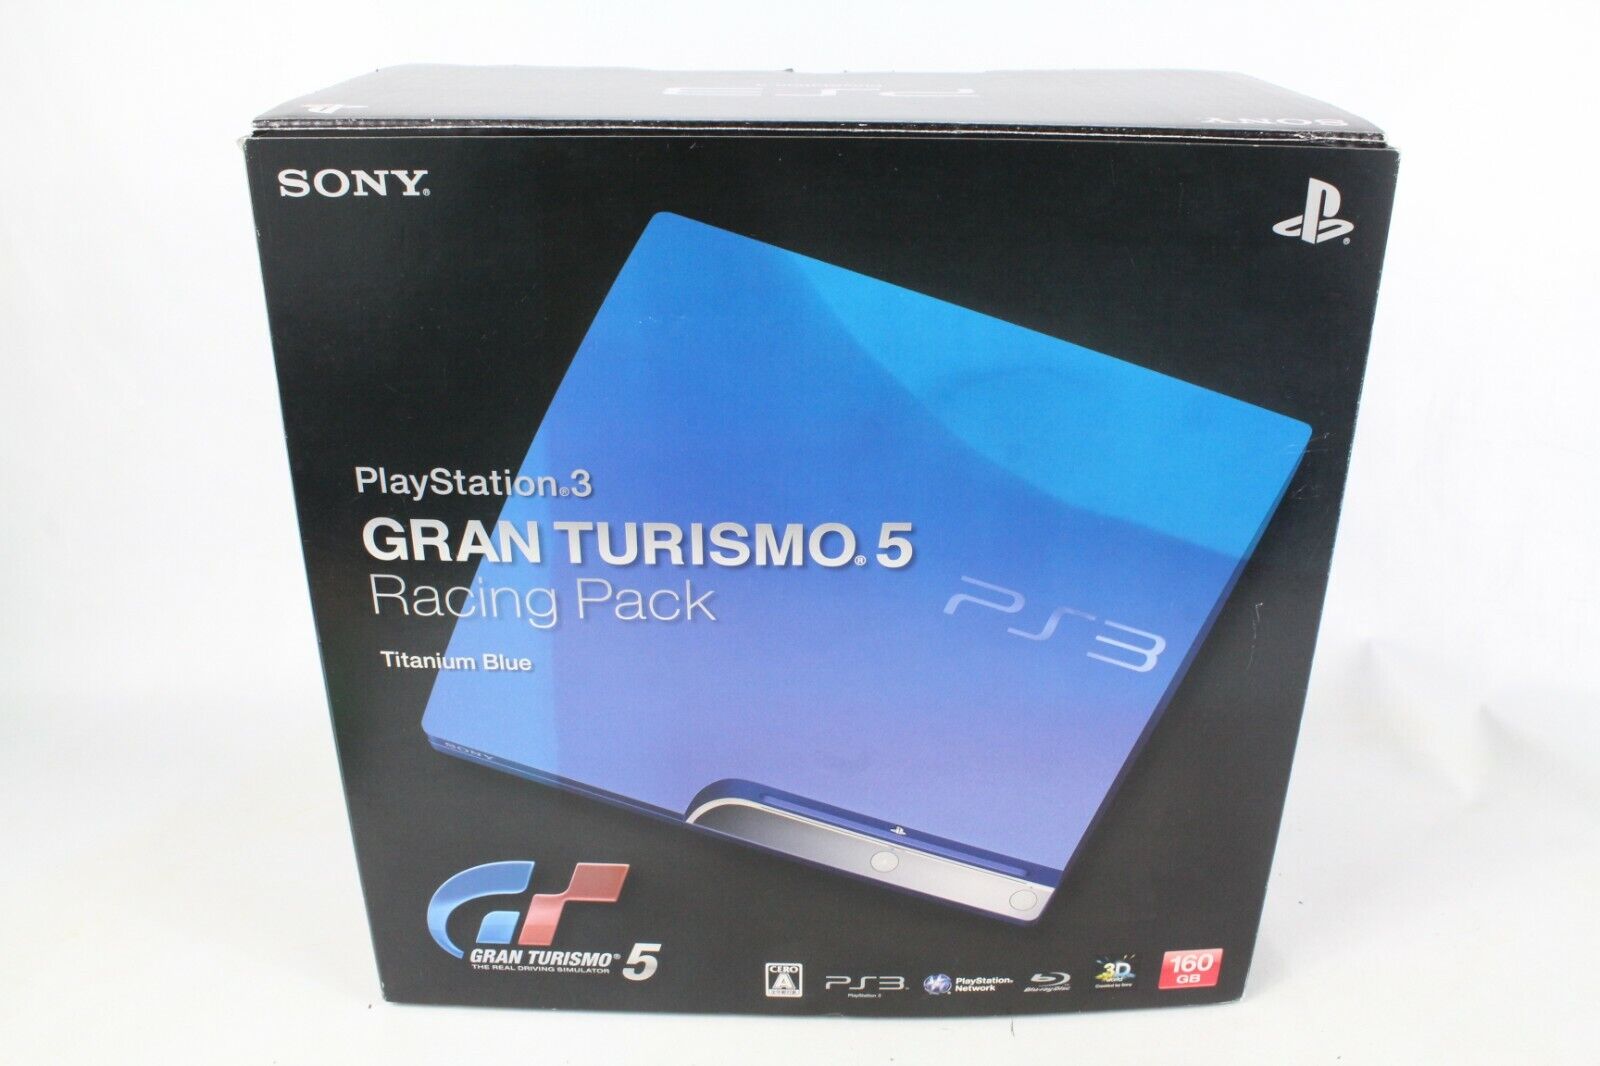 SONY Playstation 3 GRAN TURISMO.5 Racing Pack Titanium BLue Rare Limited  BOX ps3